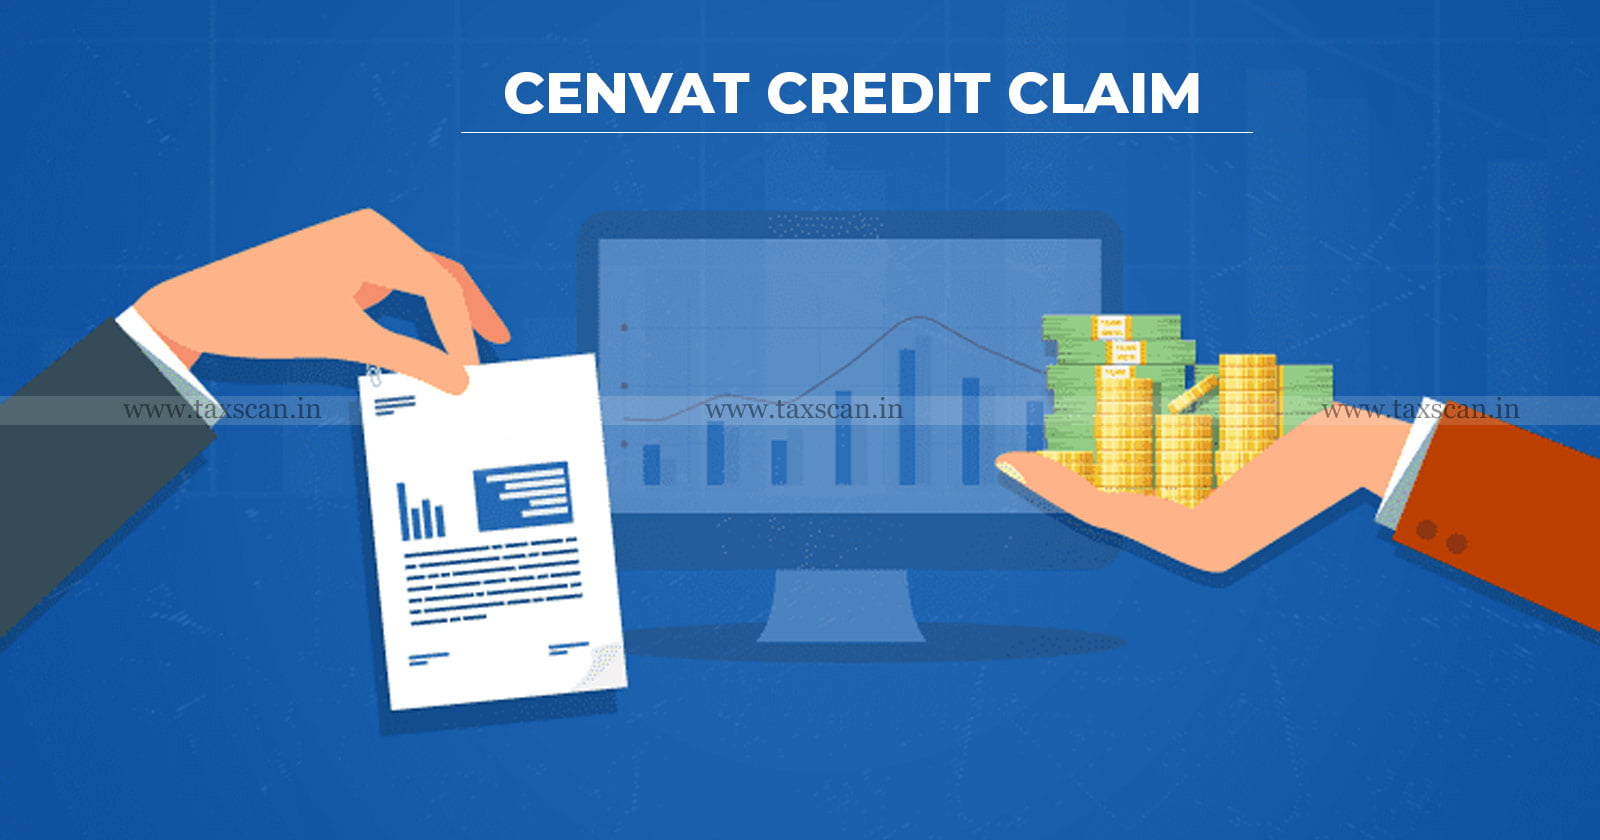 Rejection - CENVAT Credit - Claim - Rejection of CENVAT Credit Claim - Rejection of CENVAT Credit Claim not justified as ground is premature - taxscan